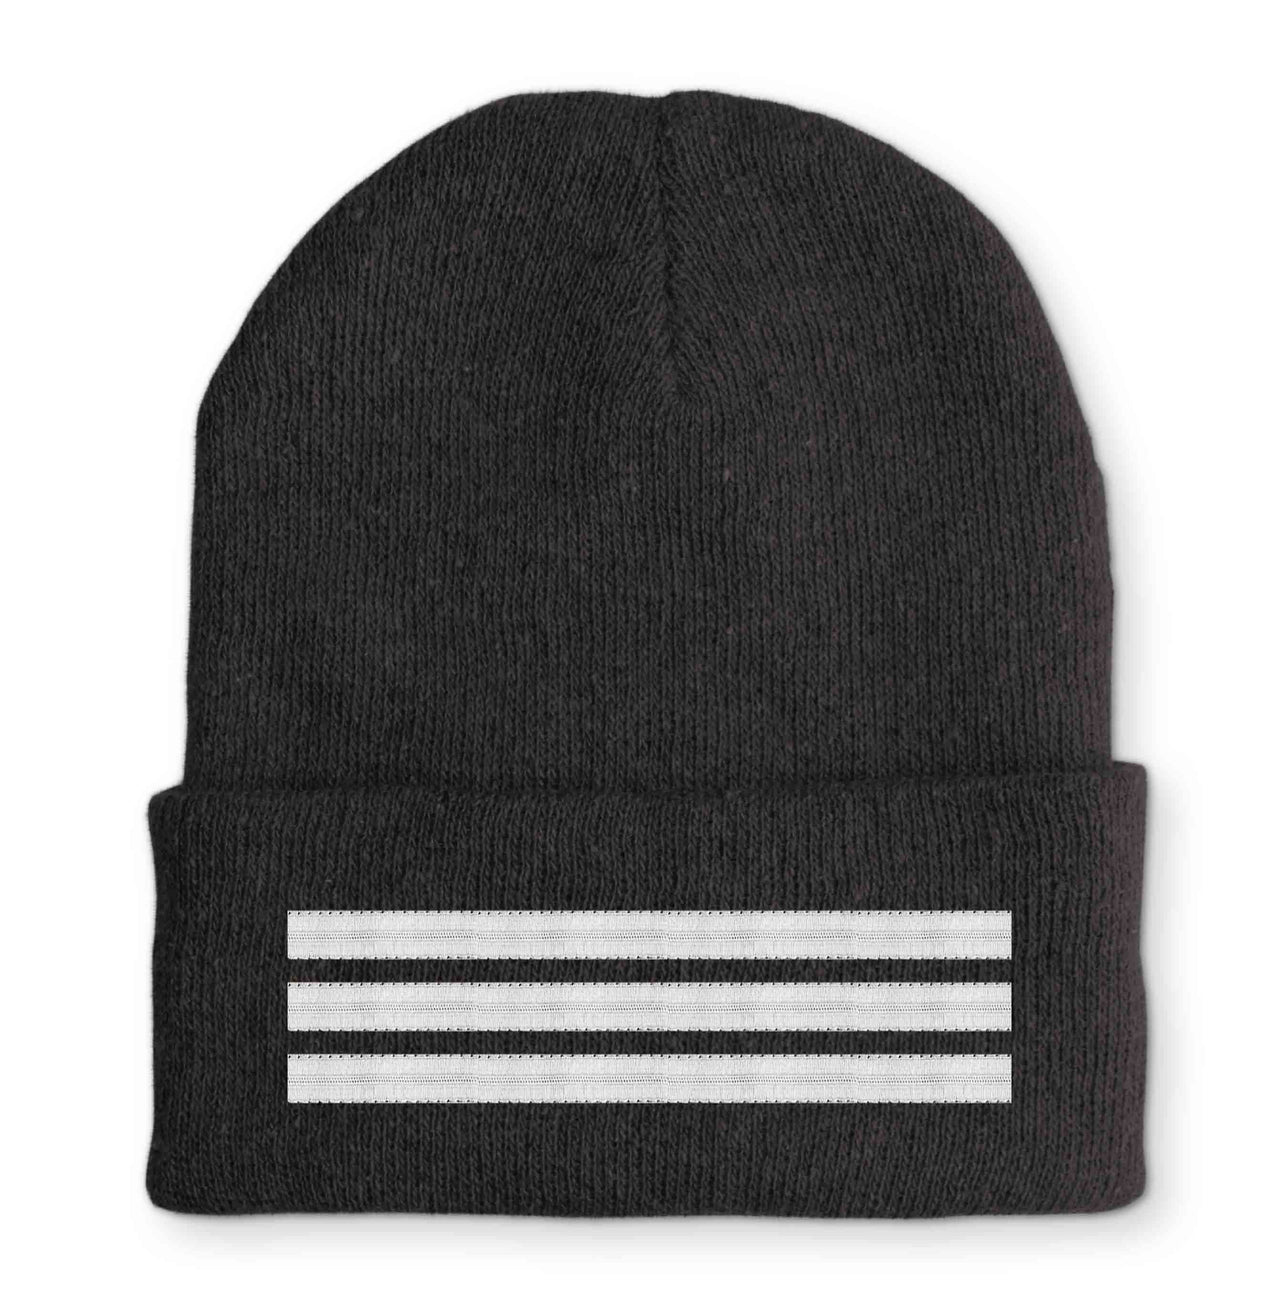 Pilot Epaulette (Silver) 3 Lines Embroidered Beanies